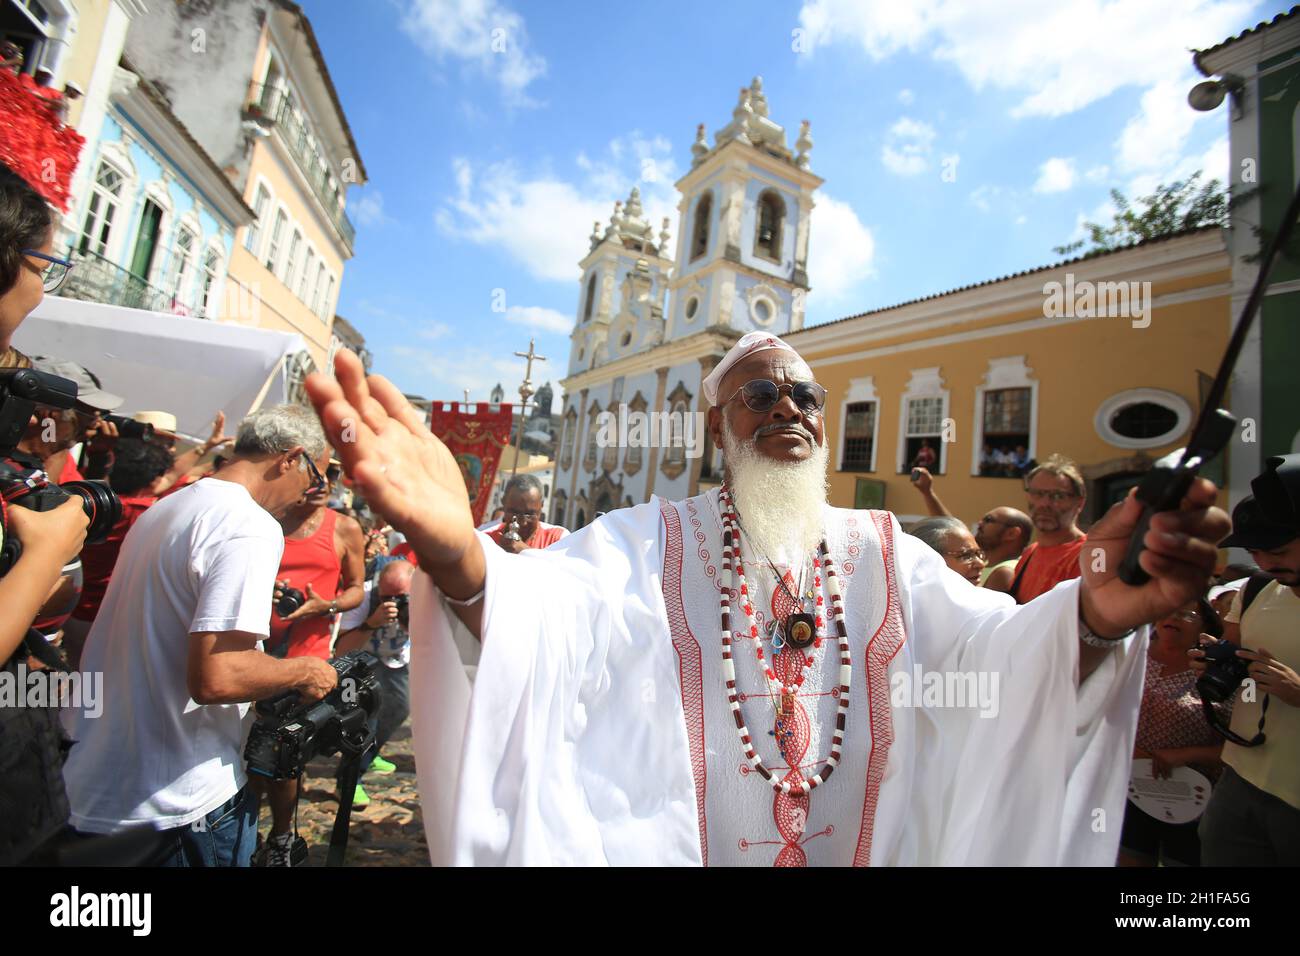 salvador, bahia / brazil - february 4, 2015: Catholics and Candomble supporters revere Santa Barbara - Iansa in syncretism - The party takes place at Stock Photo